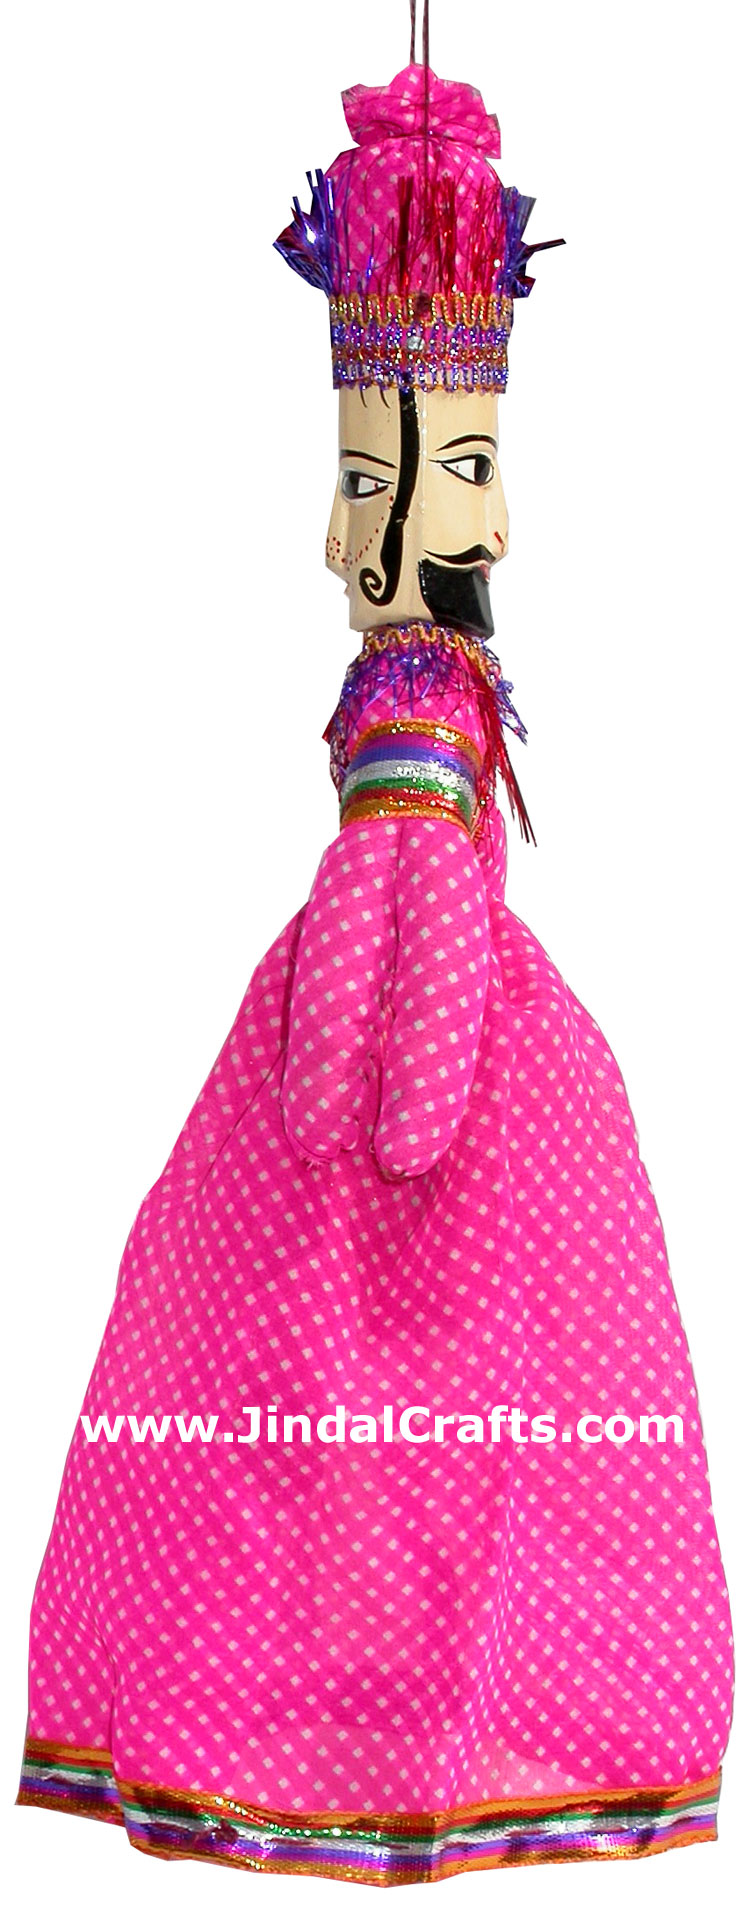 Finger Puppet Traditional Doll Rajasthan India Crafts